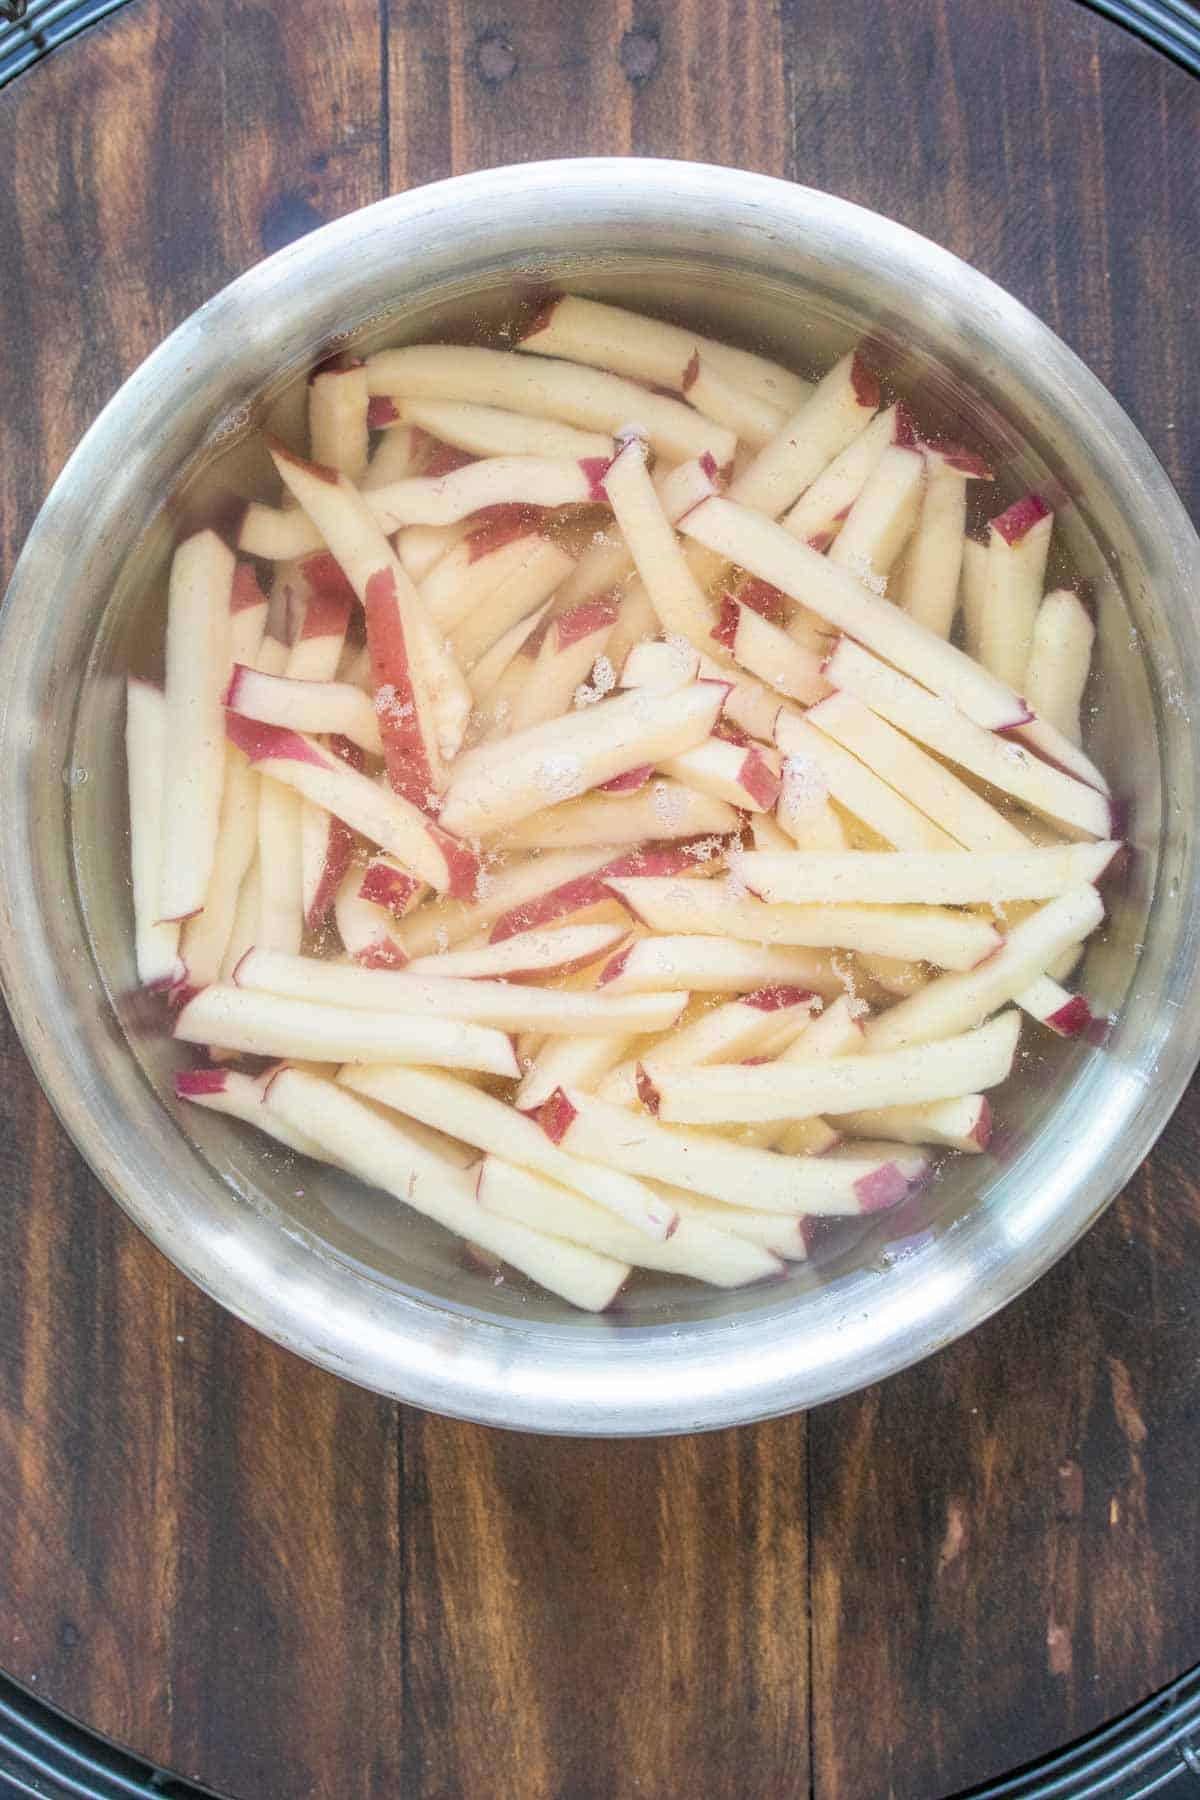 Raw french fries soaking in a bowl of water